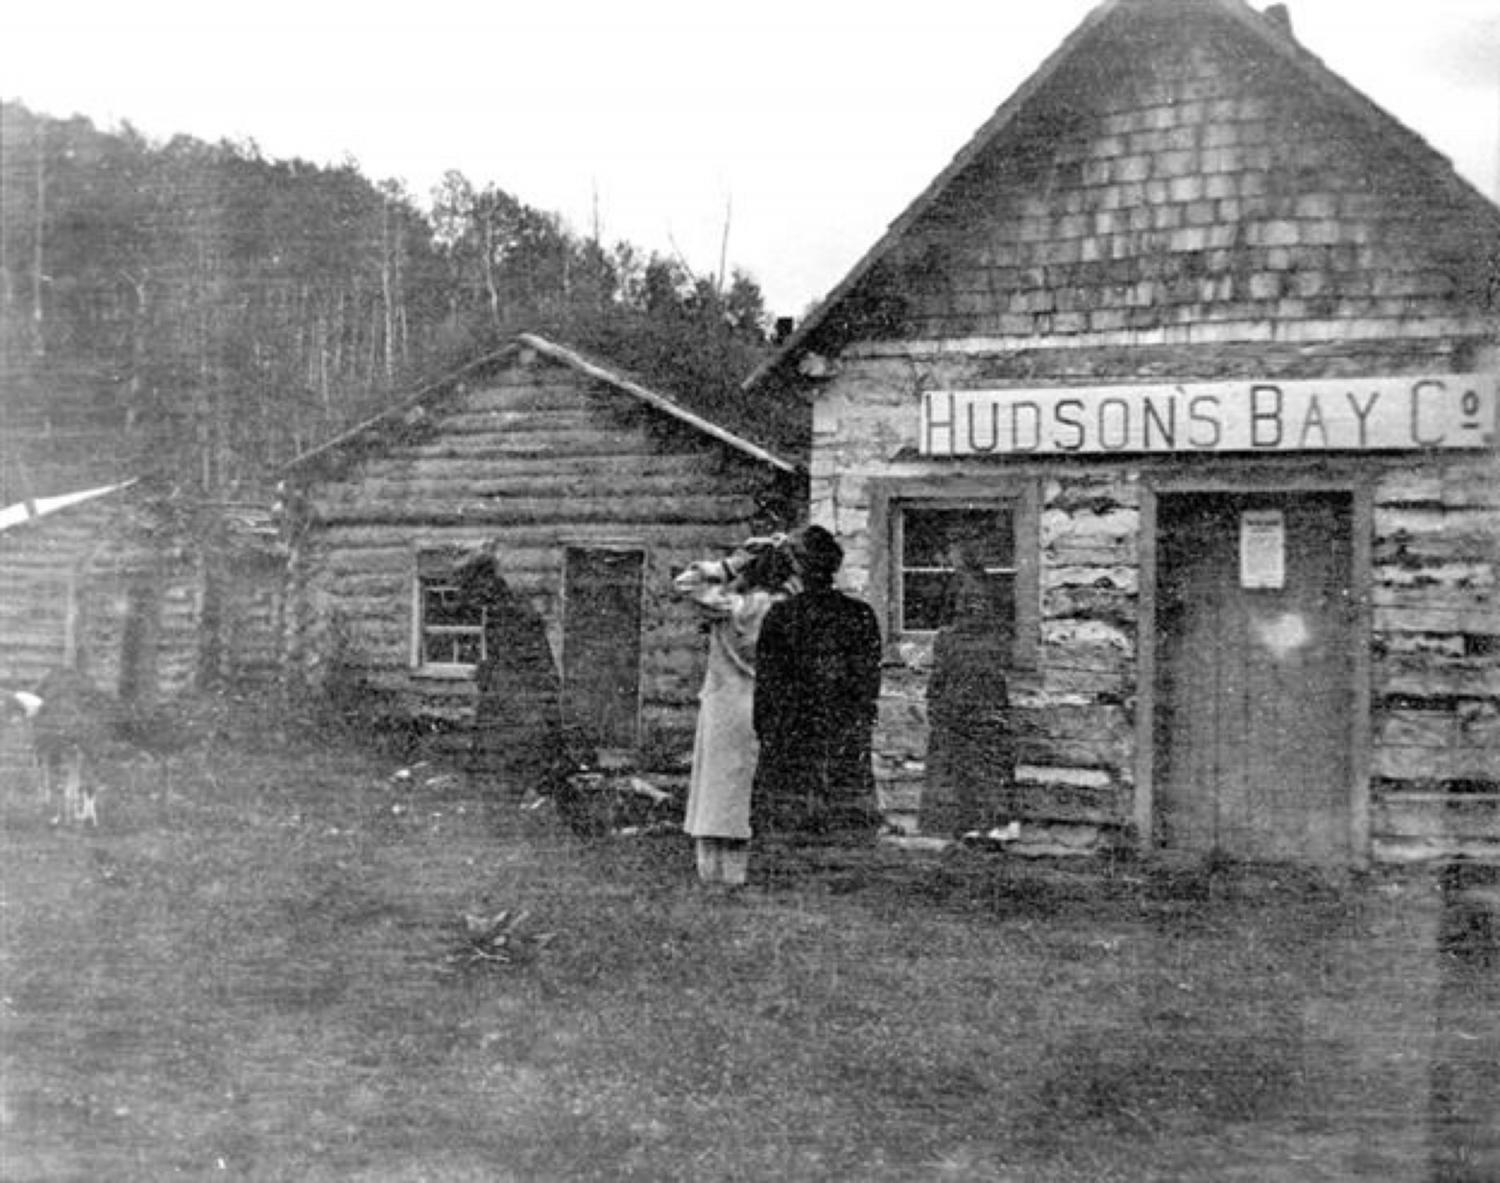 View of the exterior of a Hudson's Bay Company Tranding Post at Athabasca Landing, showing two unidentified people outside door.